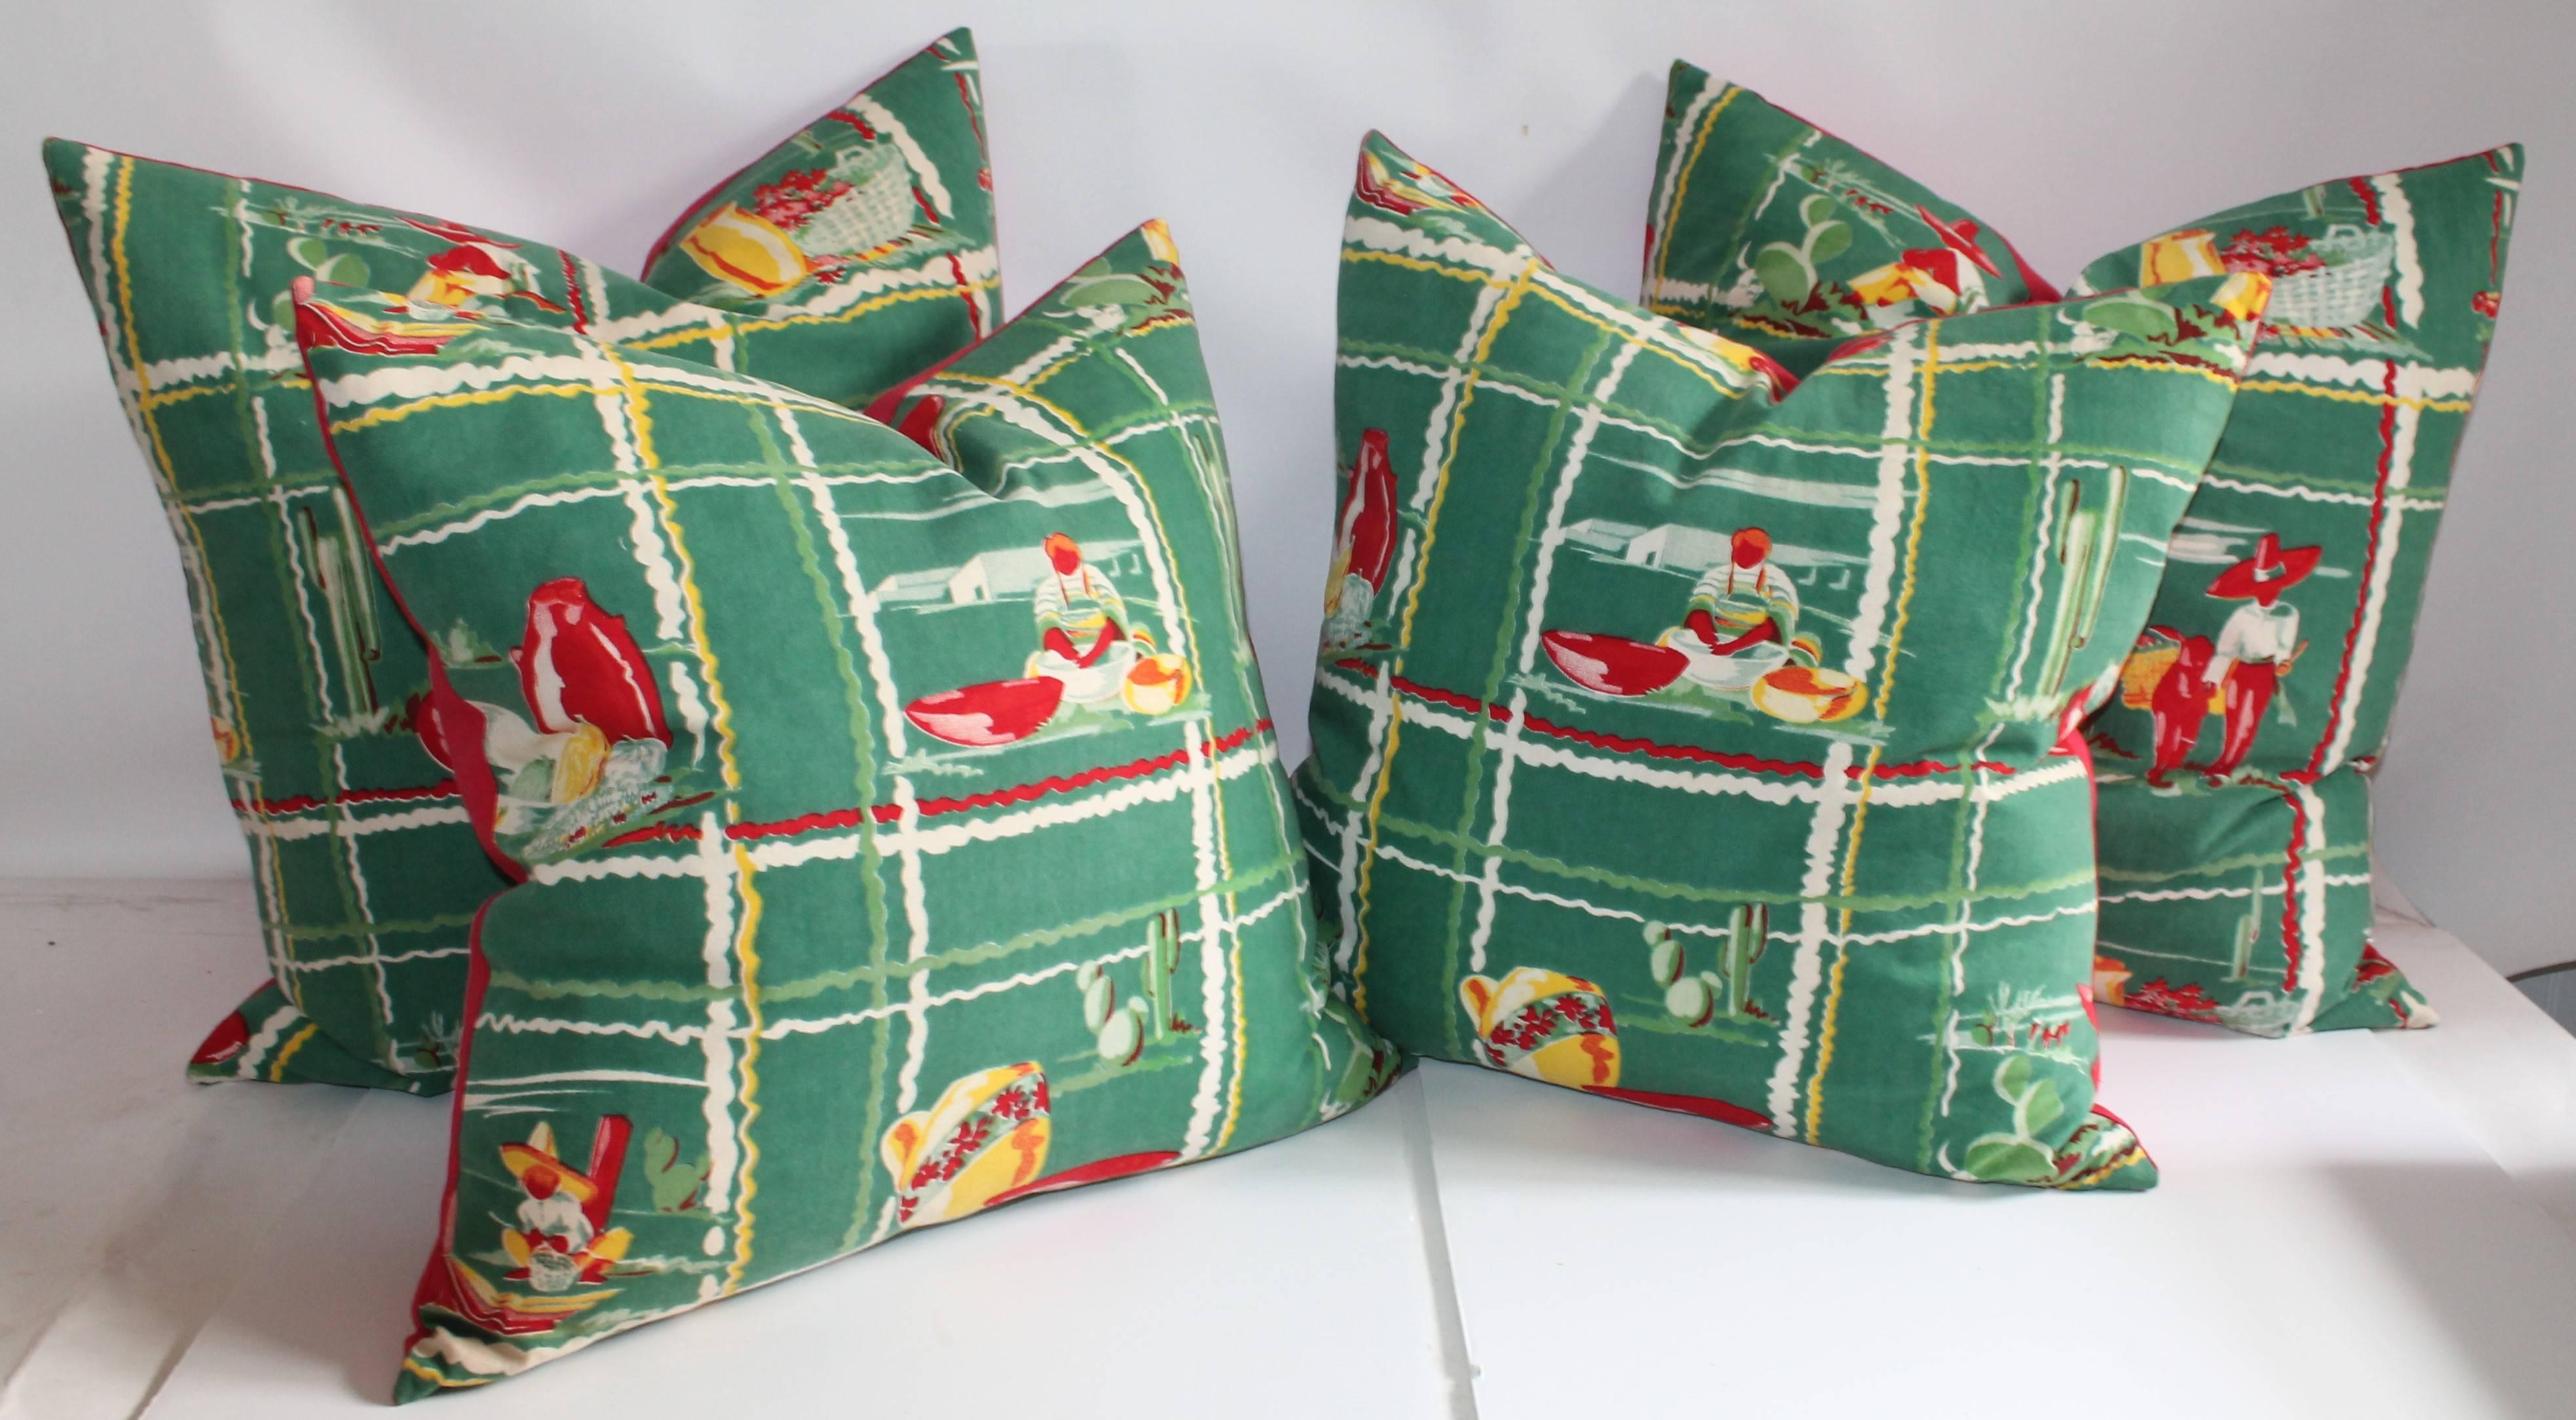 These fantastic Mexican scenic table cloth pillows are in great condition and all have cotton linen backings. The inserts are down and feather fill. Sold as a group of four pillows.